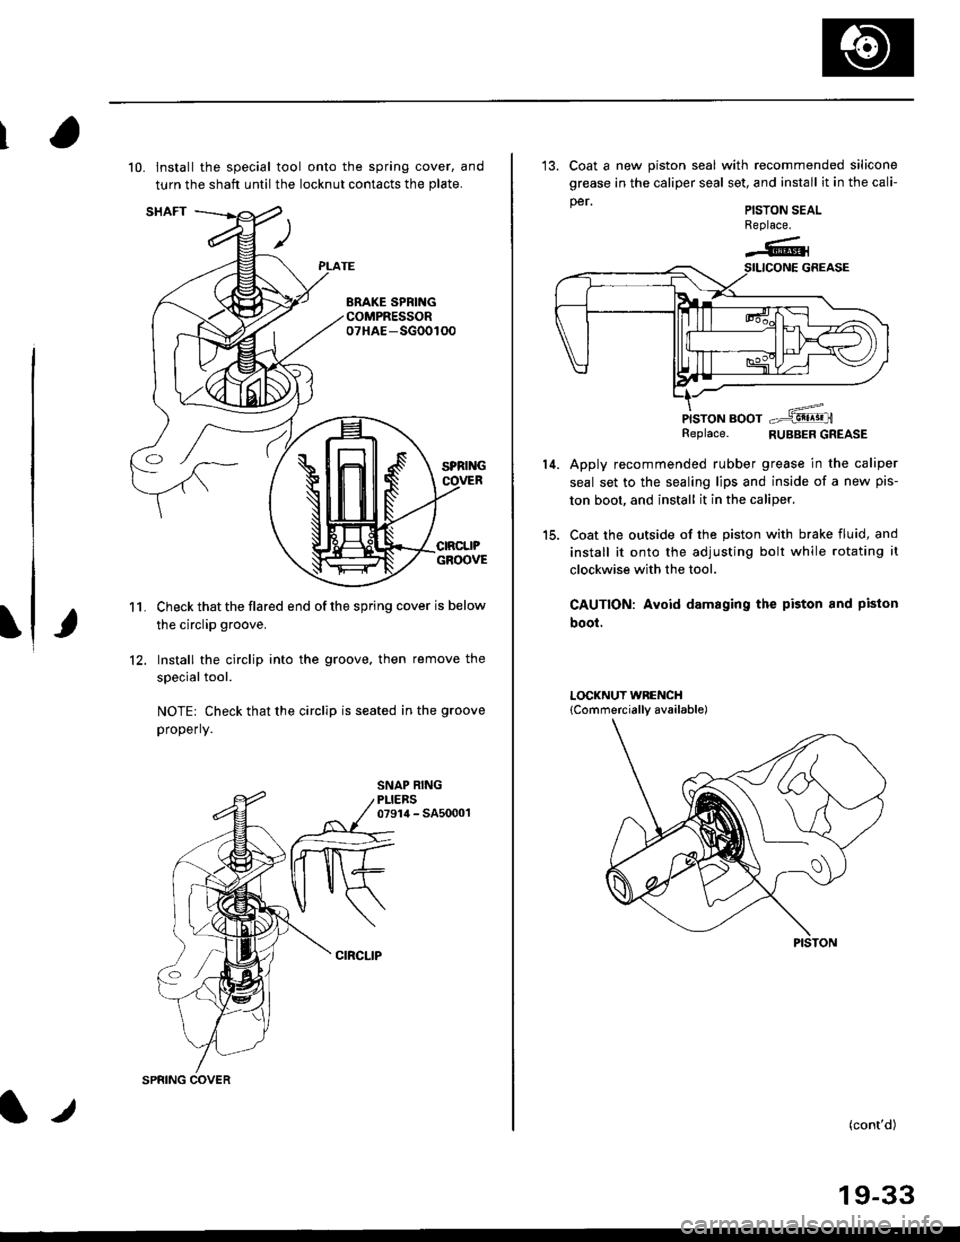 HONDA CIVIC 1997 6.G Manual Online 10. lnstall the special tool onto the spring cover, and
turn the shaft until the locknut contacts the plate.
Check that the flared end of the spring cover is below
the circlip groove.
Install the circ